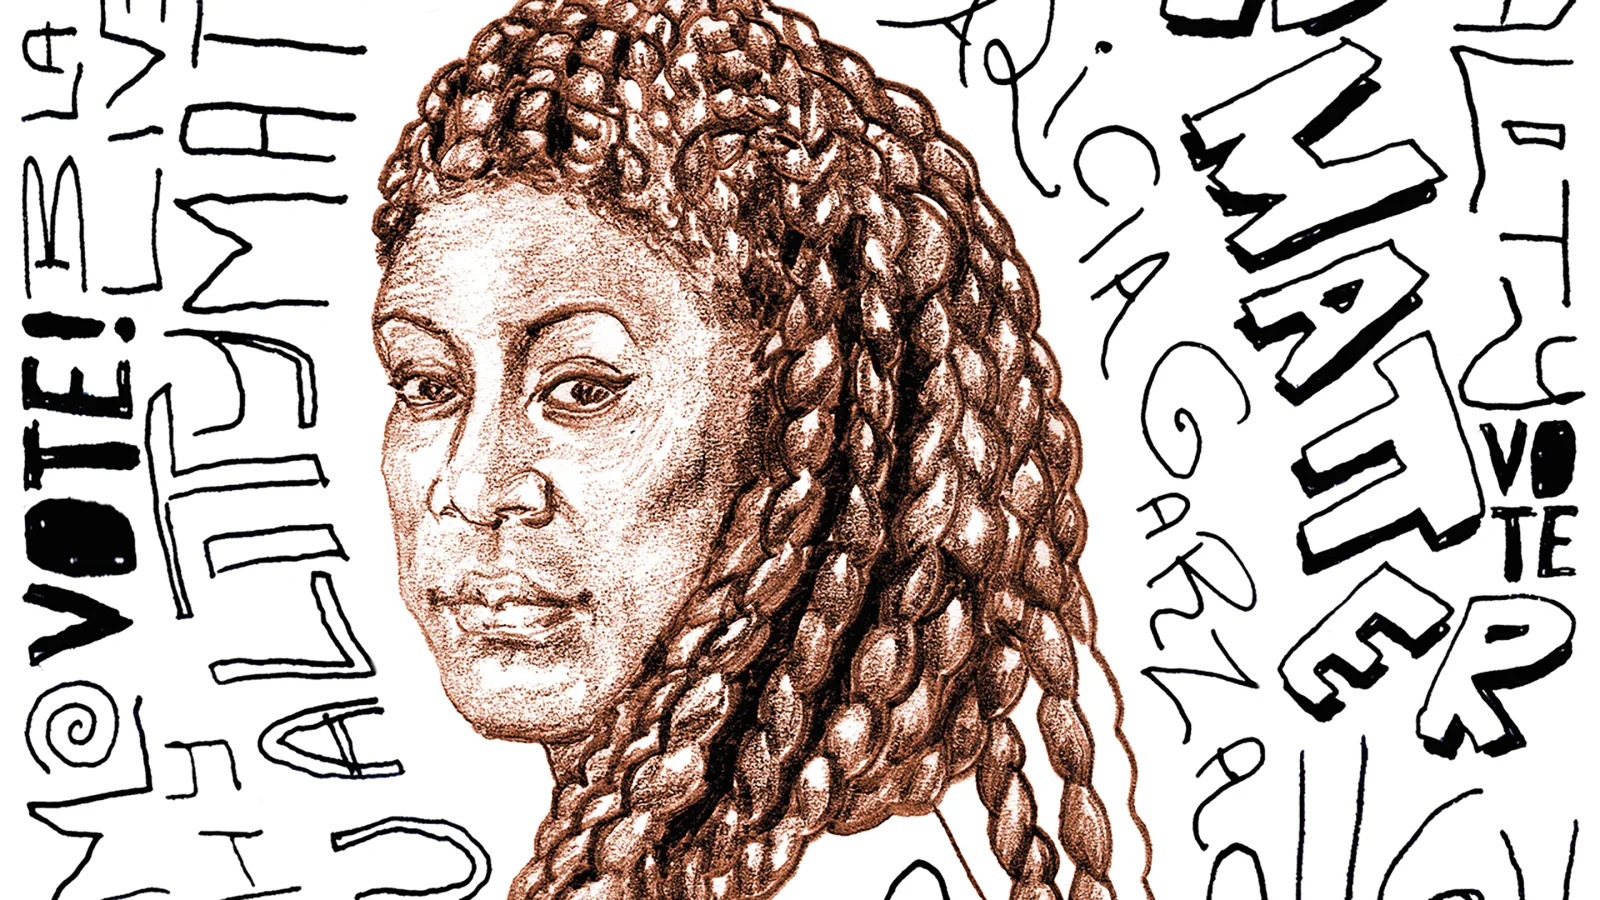 2020 - Aliza Garza, co-founder of Black Lives Matter and voting rights activist, curates and is featured in  the Playboy Symposium. (Illustration: George McCalman.)